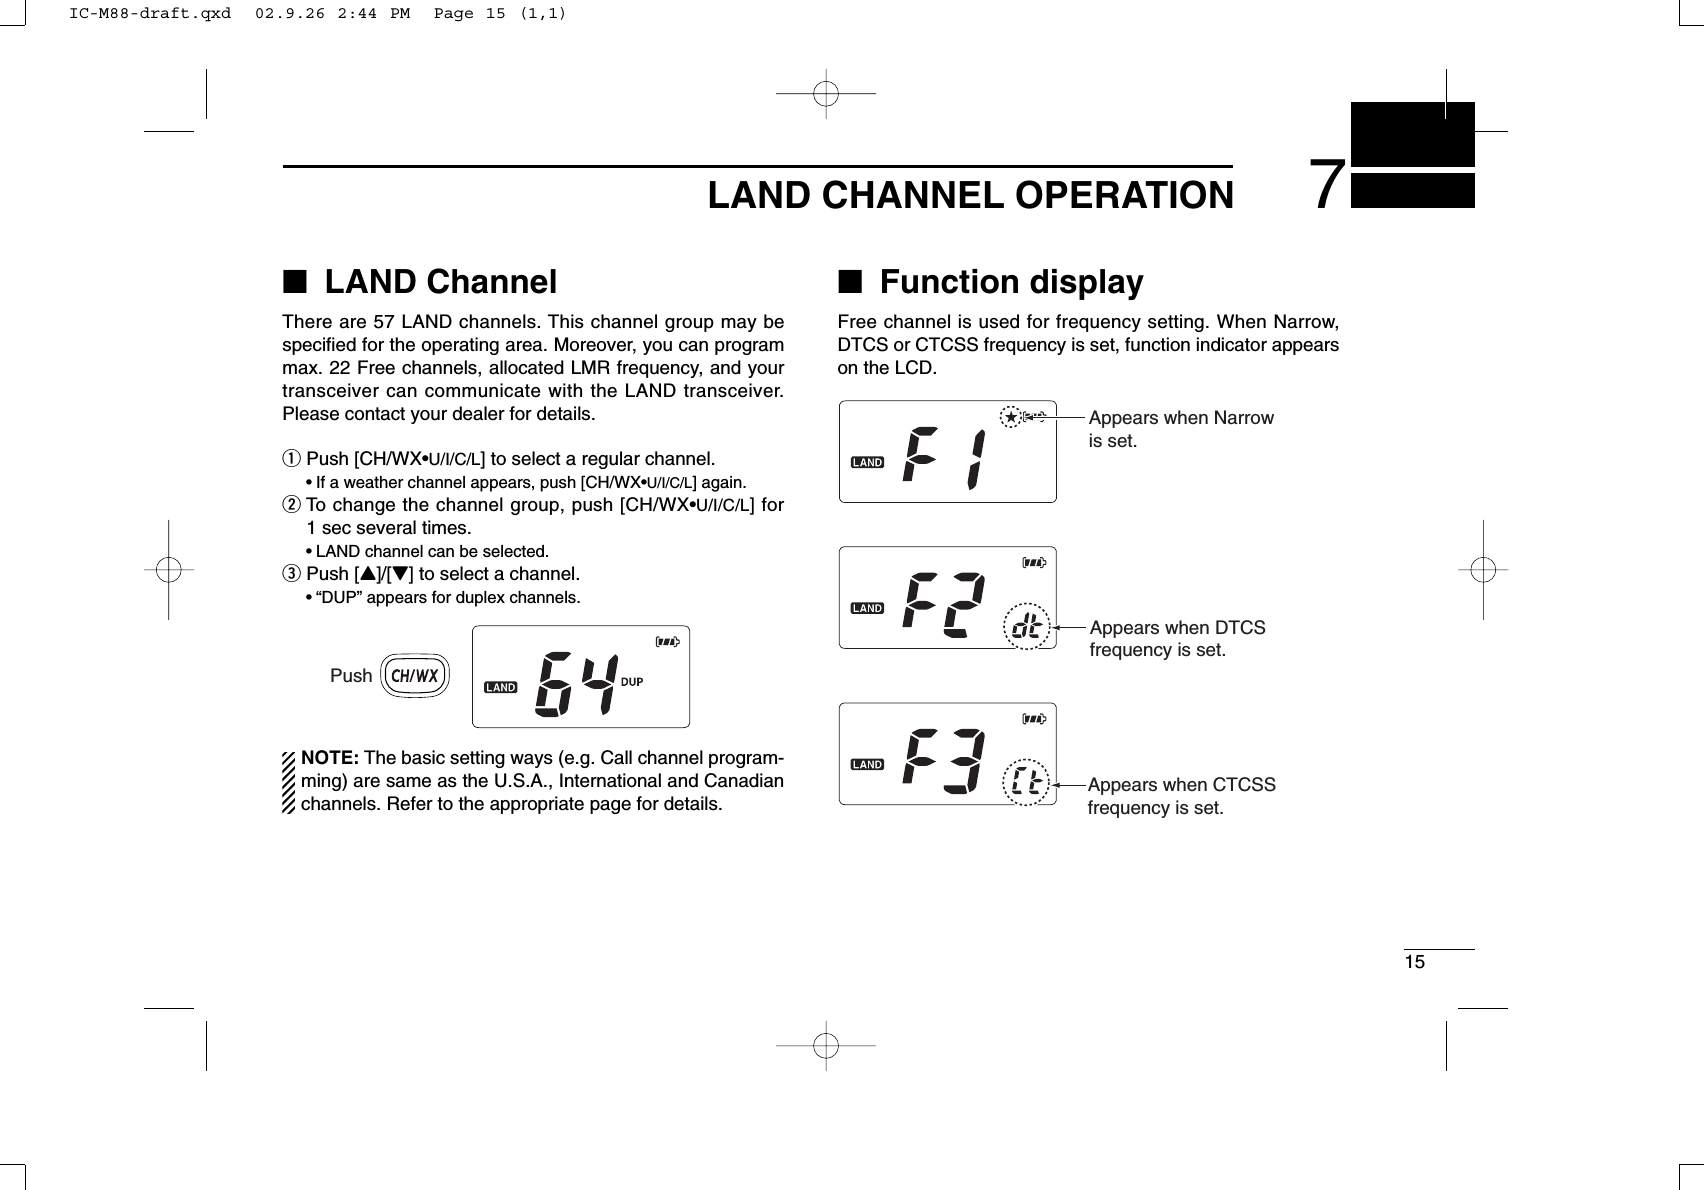 157LAND CHANNEL OPERATION■LAND ChannelThere are 57 LAND channels. This channel group may bespeciﬁed for the operating area. Moreover, you can programmax. 22 Free channels, allocated LMR frequency, and yourtransceiver can communicate with the LAND transceiver.Please contact your dealer for details.qPush [CH/WX•U/I/C/L] to select a regular channel.•If a weather channel appears, push [CH/WX•U/I/C/L] again.wTo change the channel group, push [CH/WX•U/I/C/L] for1 sec several times.•LAND channel can be selected.ePush [Y]/[Z] to select a channel.•“DUP” appears for duplex channels.NOTE: The basic setting ways (e.g. Call channel program-ming) are same as the U.S.A., International and Canadianchannels. Refer to the appropriate page for details.■Function displayFree channel is used for frequency setting. When Narrow,DTCS or CTCSS frequency is set, function indicator appearson the LCD.PushAppears when DTCSfrequency is set.Appears when CTCSSfrequency is set.Appears when Narrowis set.IC-M88-draft.qxd  02.9.26 2:44 PM  Page 15 (1,1)